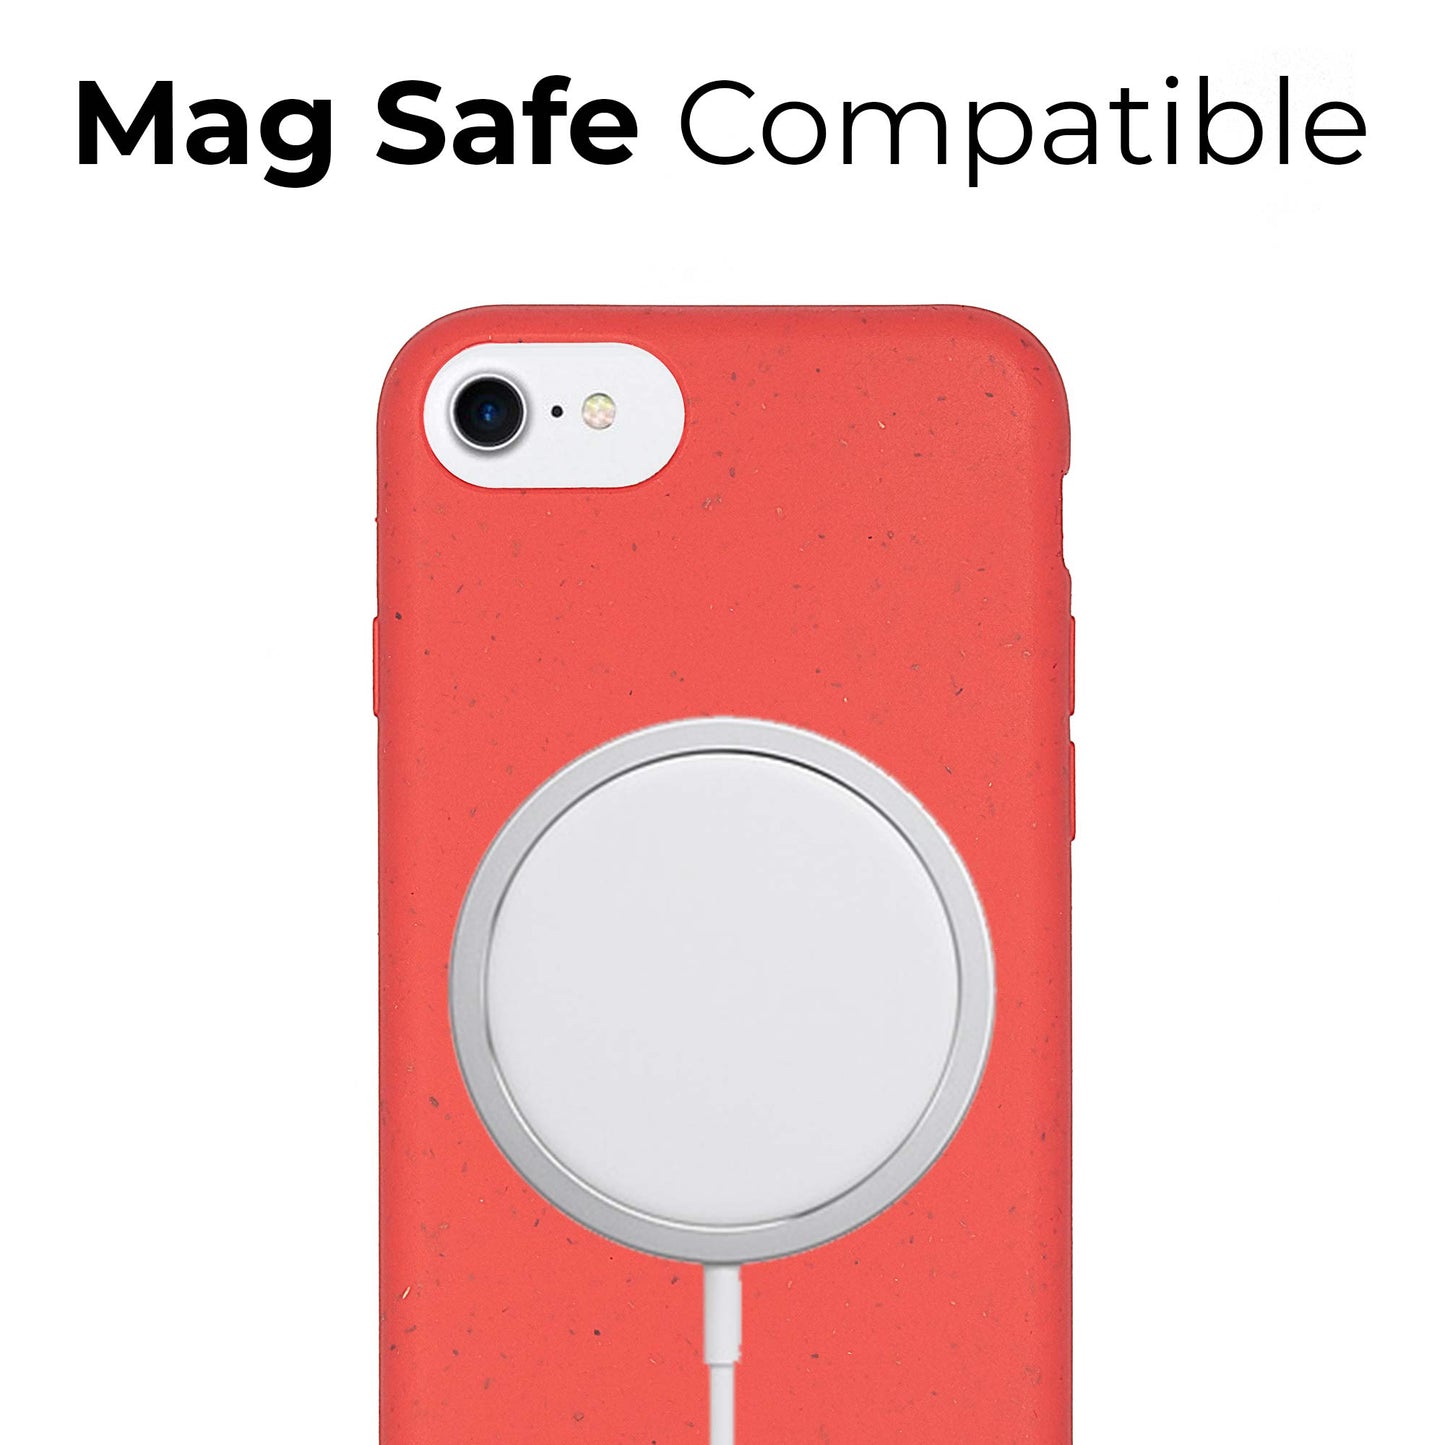 Biodegradable Personalized Phone Case - Red